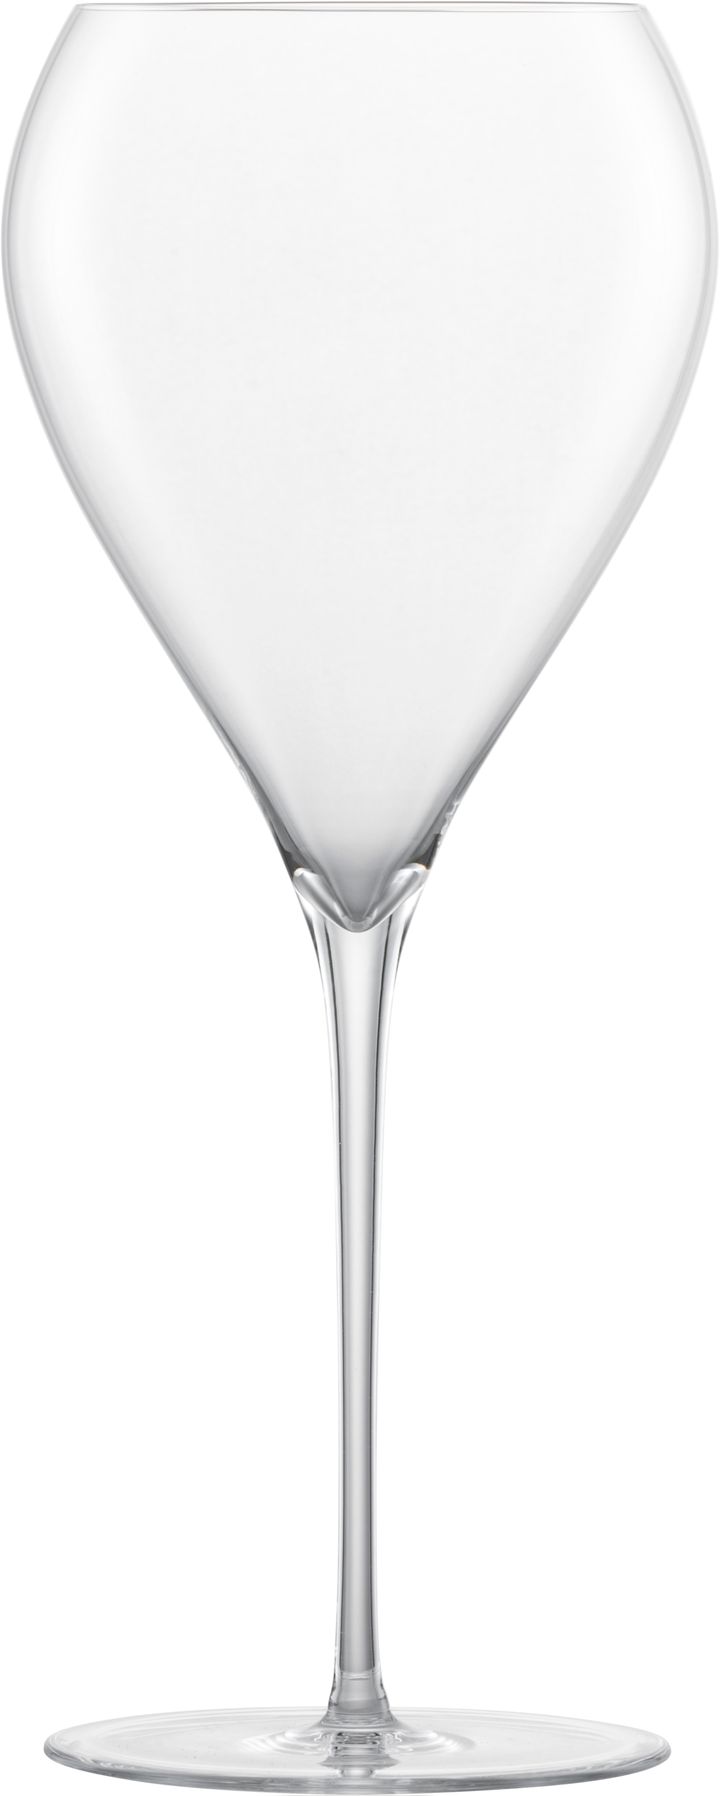 Enoteca champagne glasses - 67 cl - Zwiesel